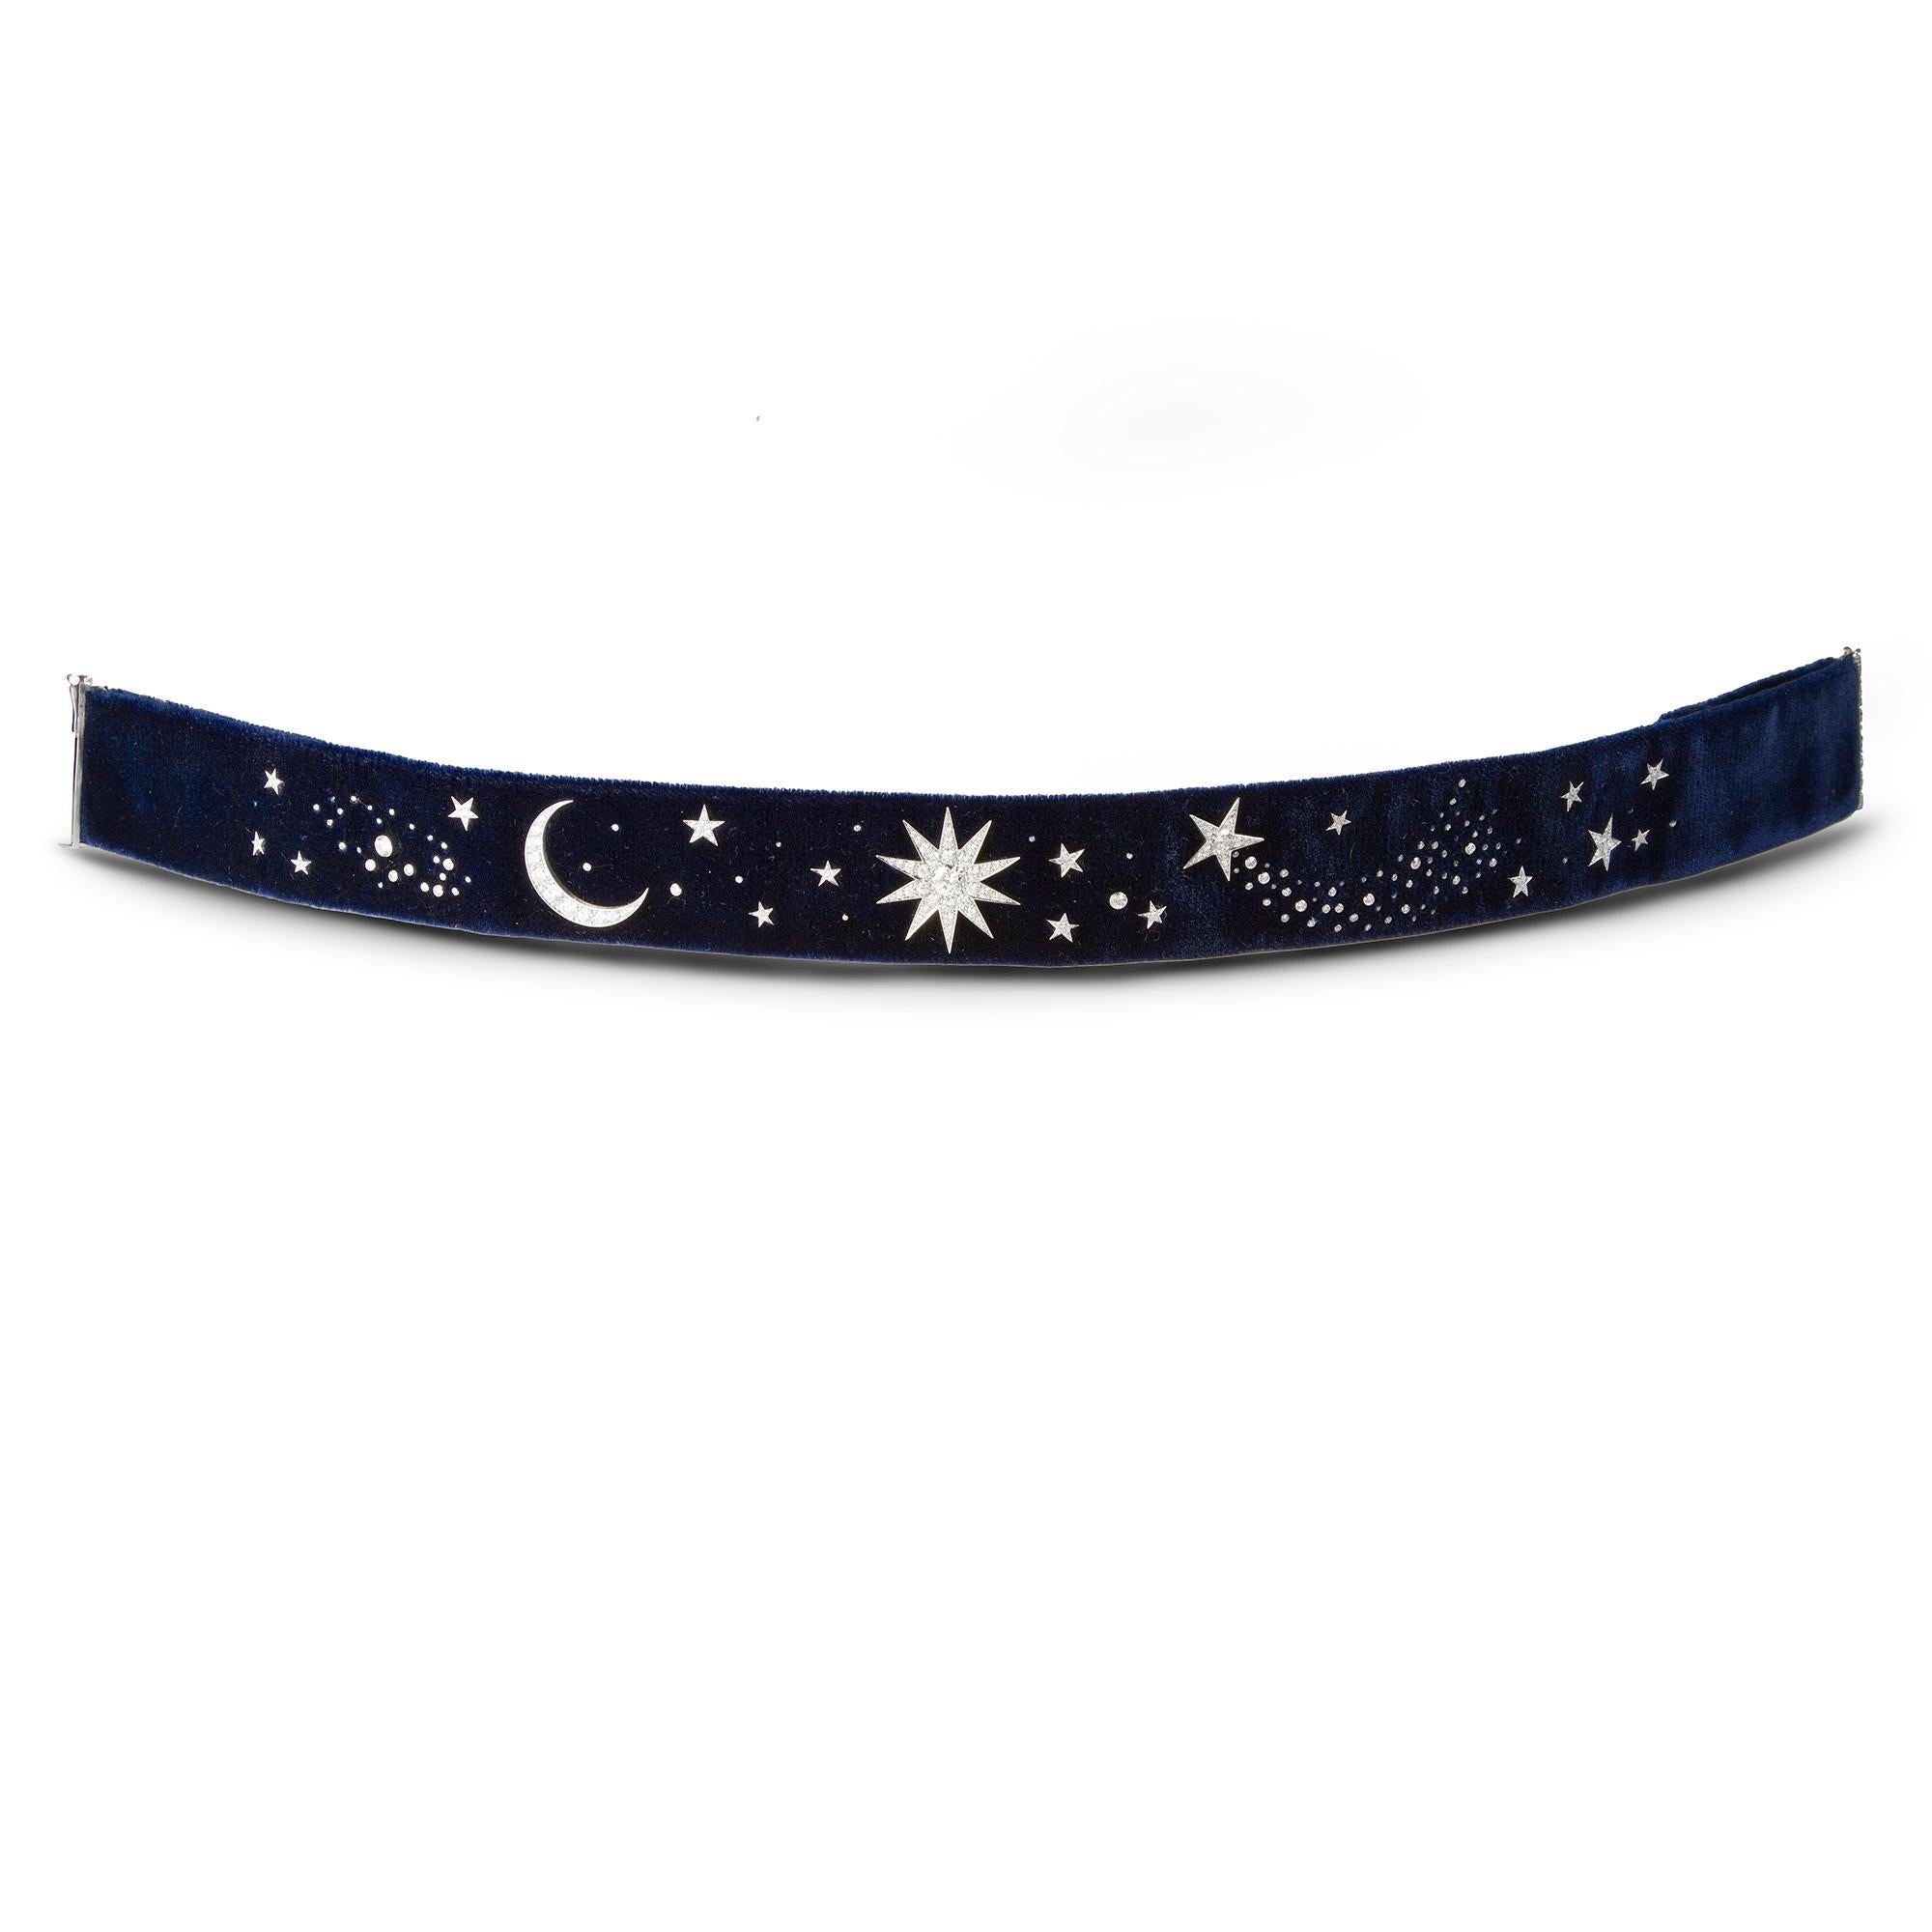 Love, Magic And Night Sky,the midnight blue velvet choker centrally decorated with a large star set with round brilliant-cut diamonds flanked by crescent moon, shooting star and other star motifs, all set with round brilliant-cut diamonds with a